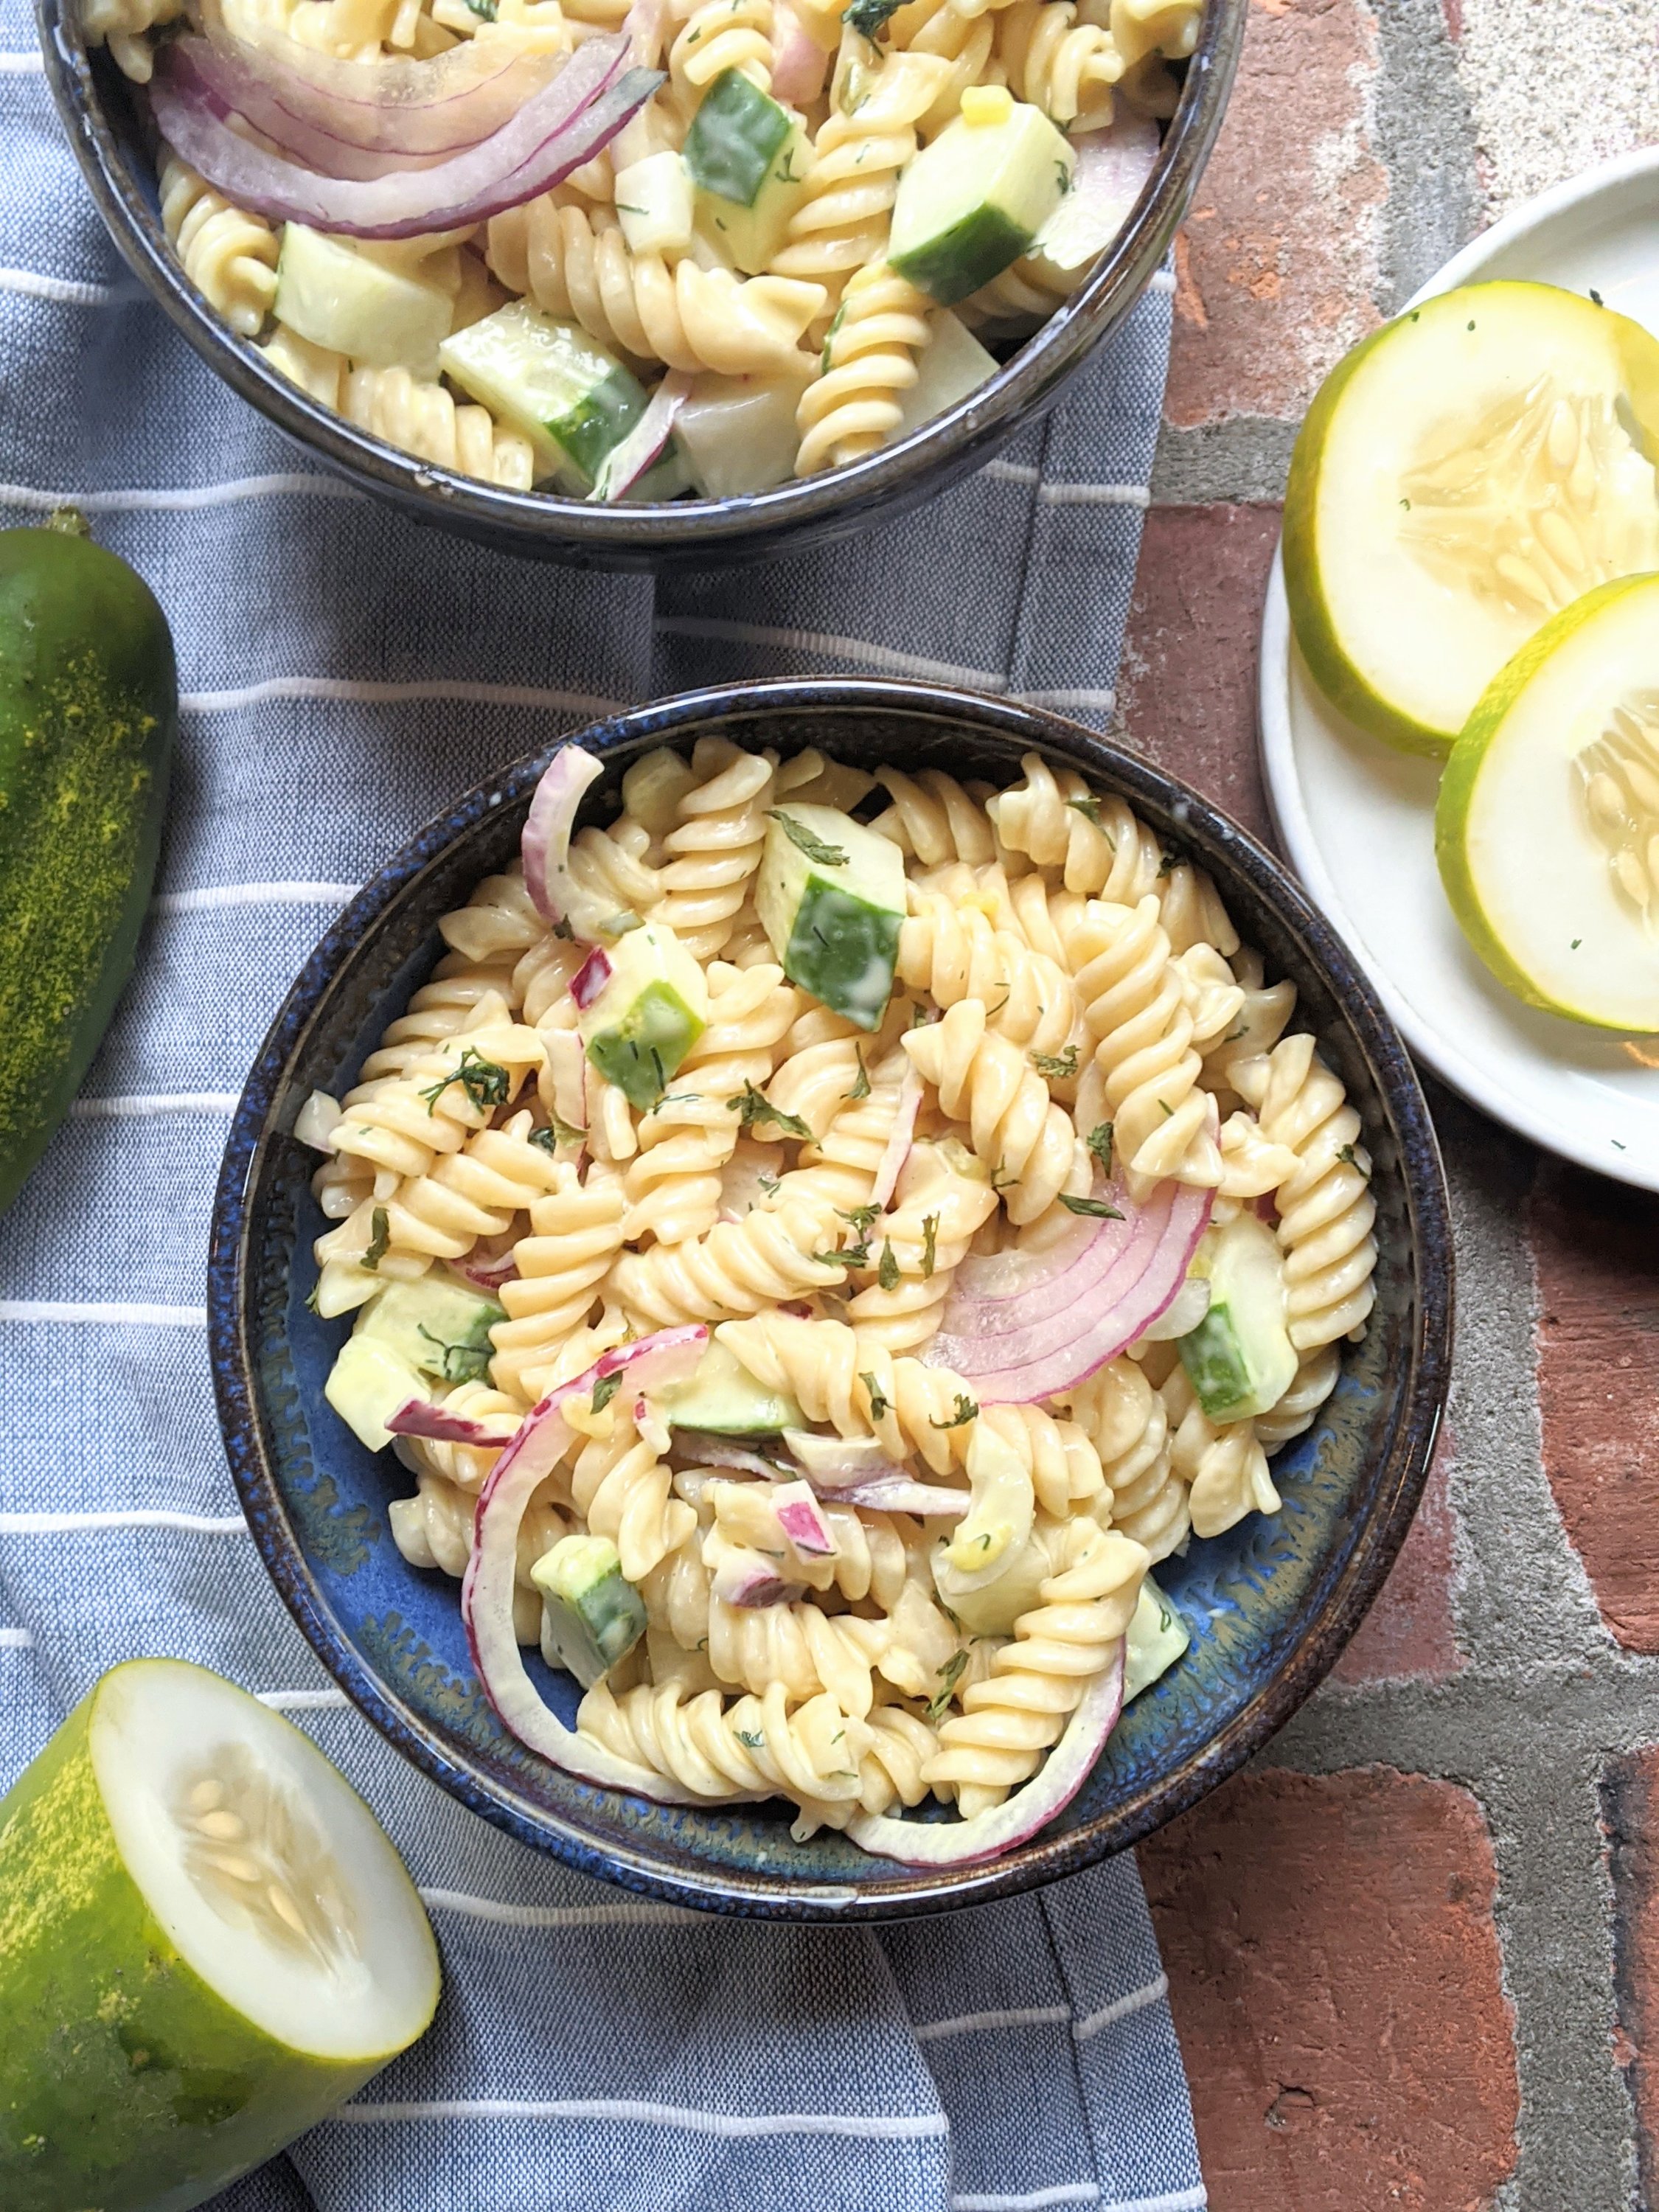 garden cucumber pasta salad vegan gluten free healthy homemade side dishes for summer party bbq potluck brunch everyone will love crowd pleasers favorites viral